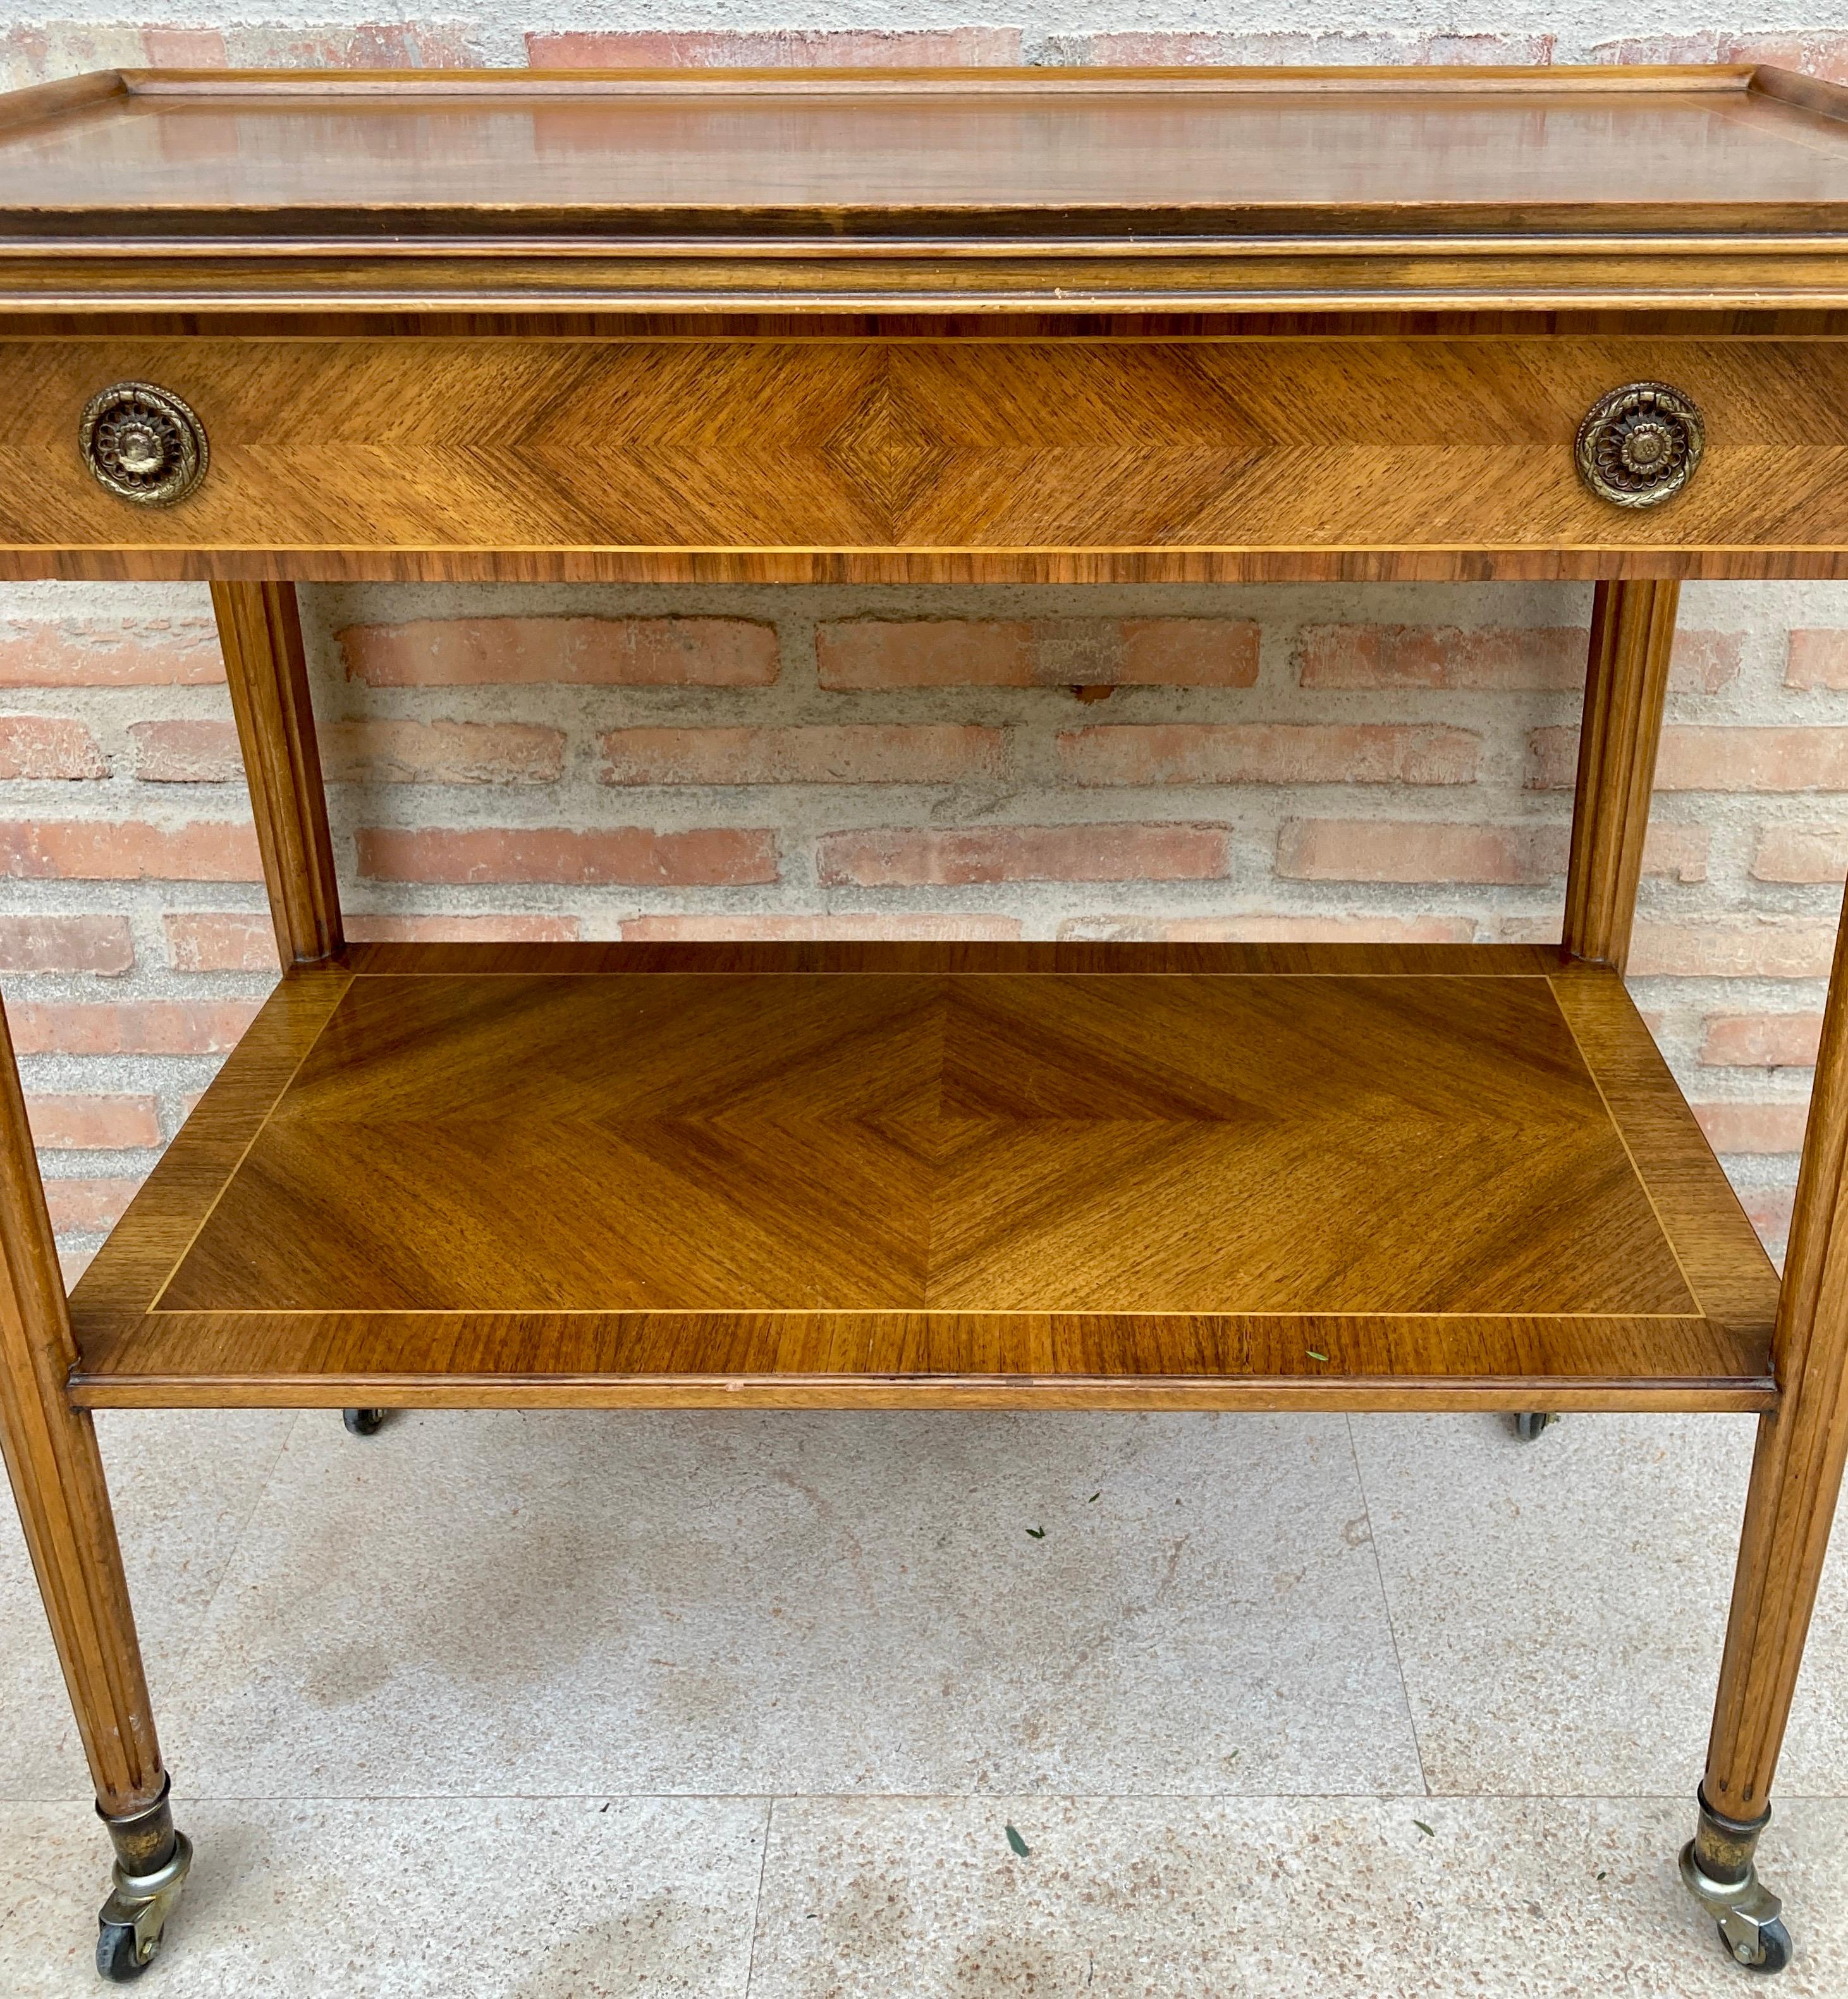 French Provincial Neoclassic French Marquetry Side Table With One Drawer And Wheels 1940s For Sale